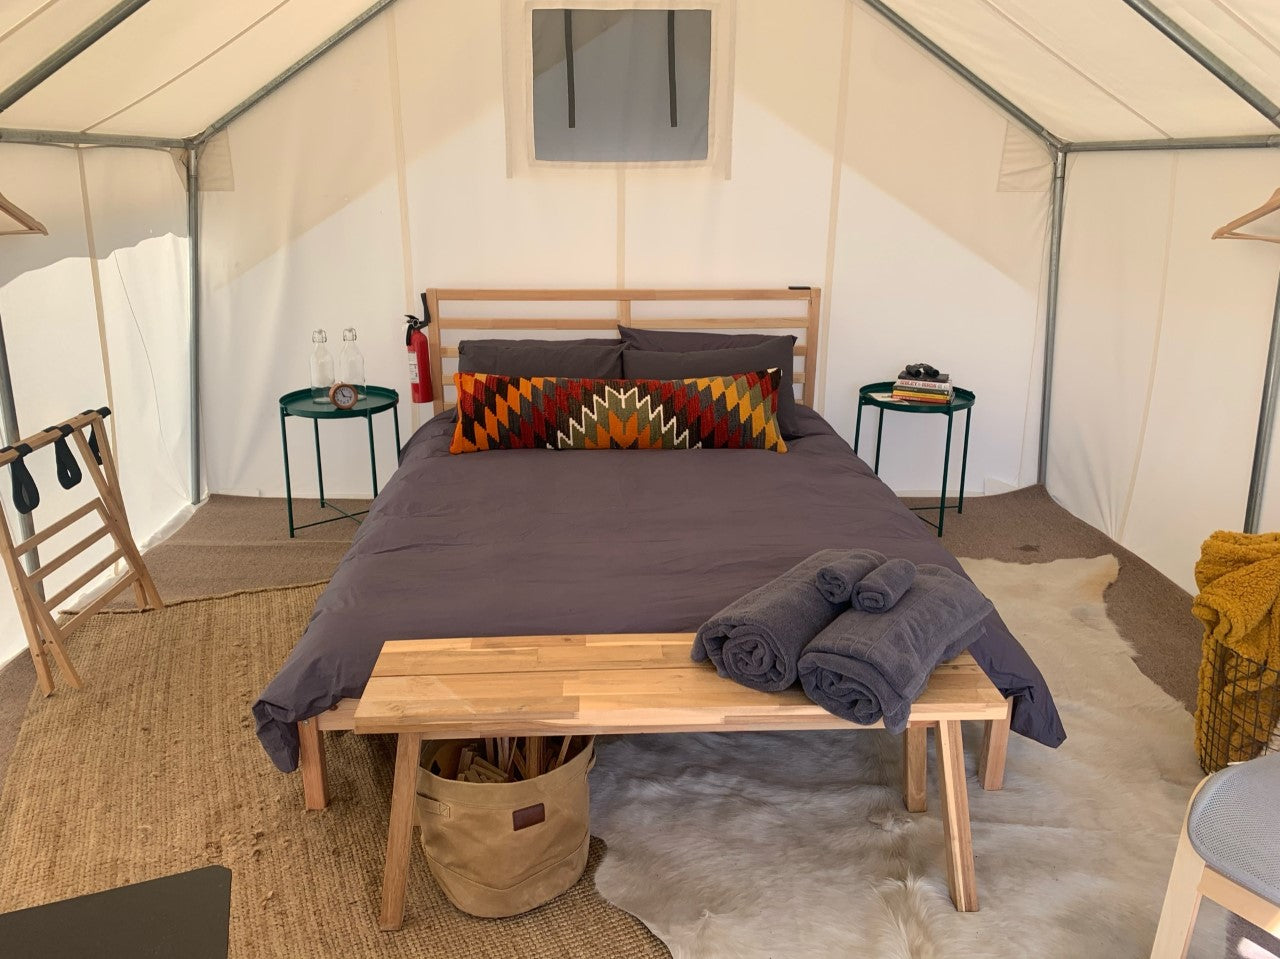 Why You Should Consider a Canvas Tent for Camping